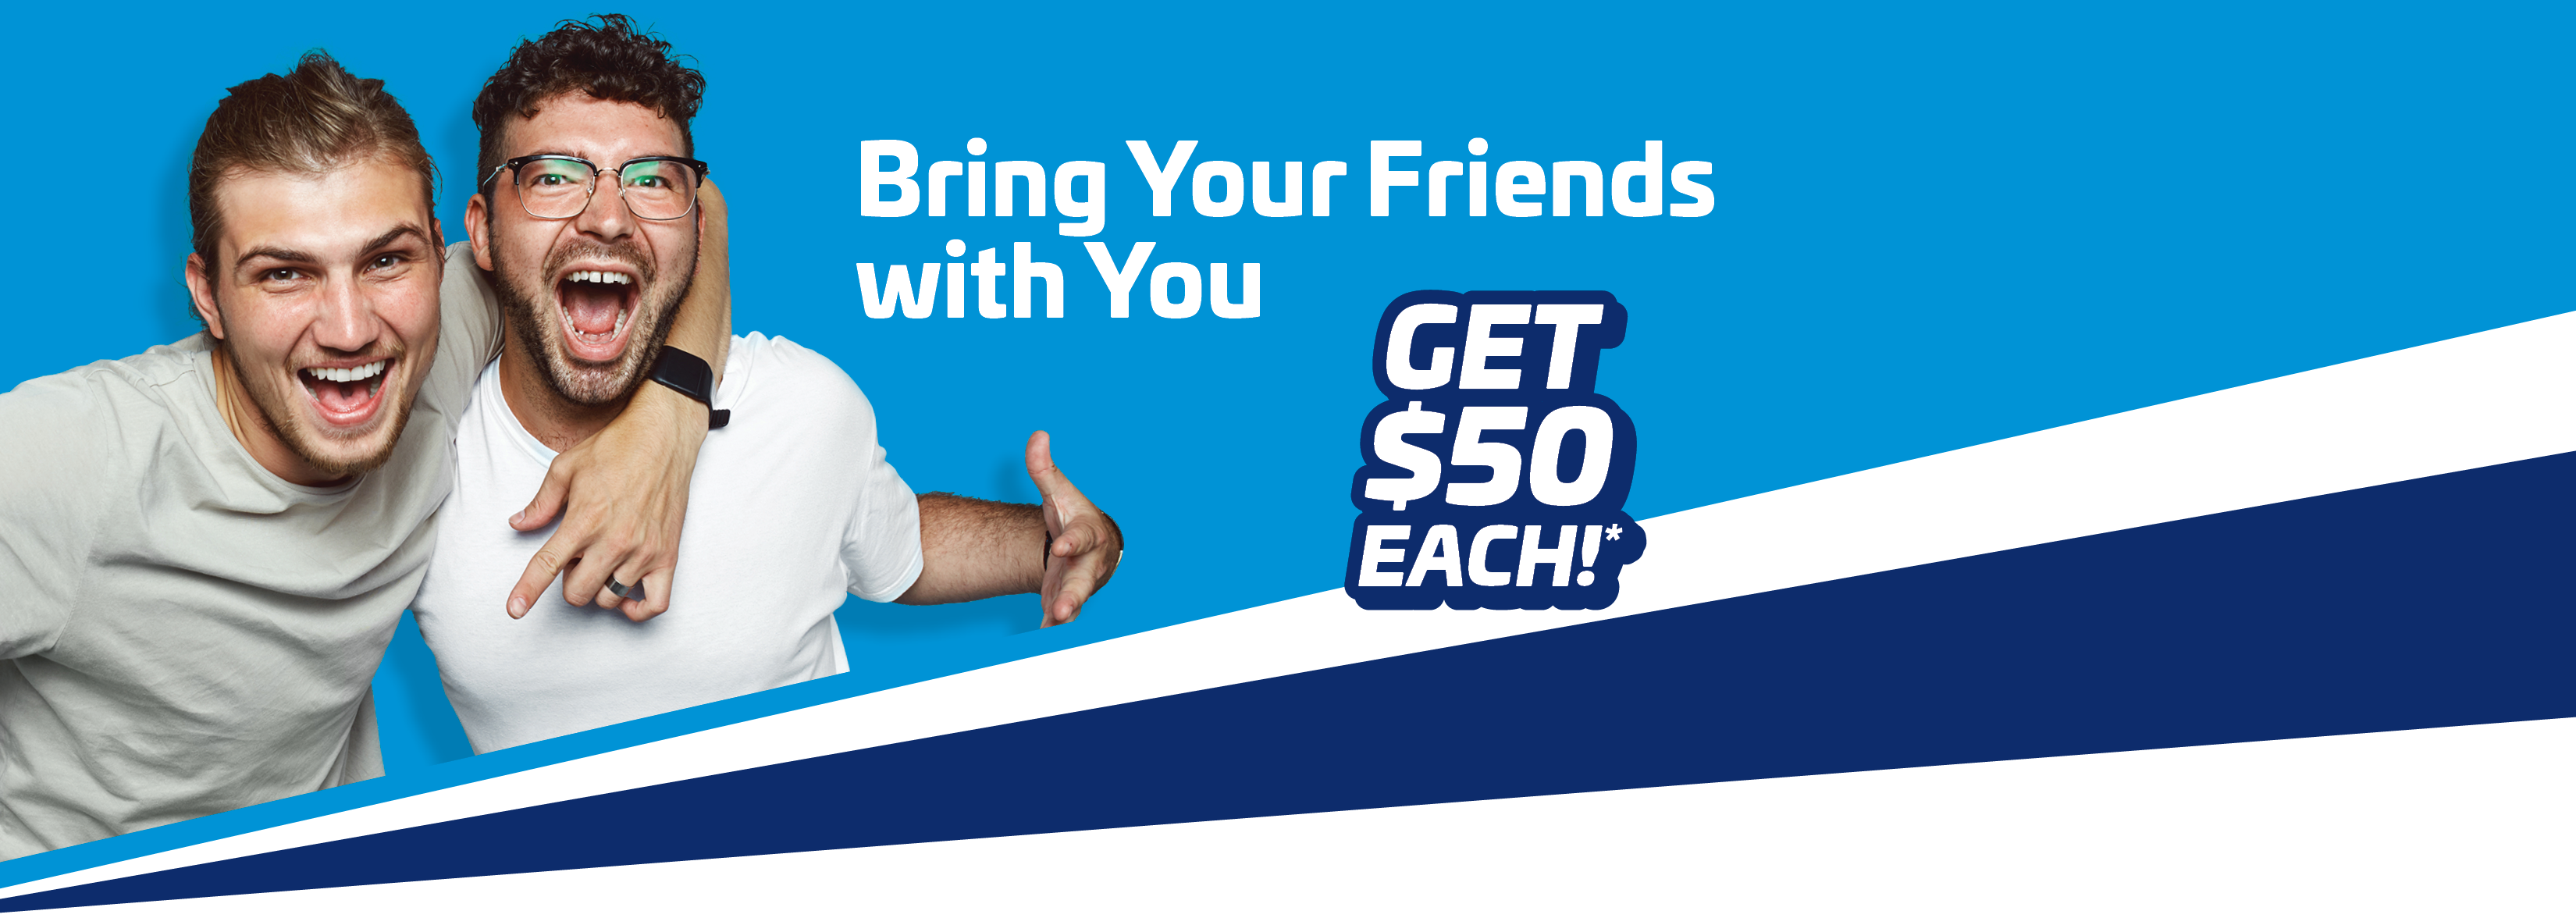 Refer a friend page callout image